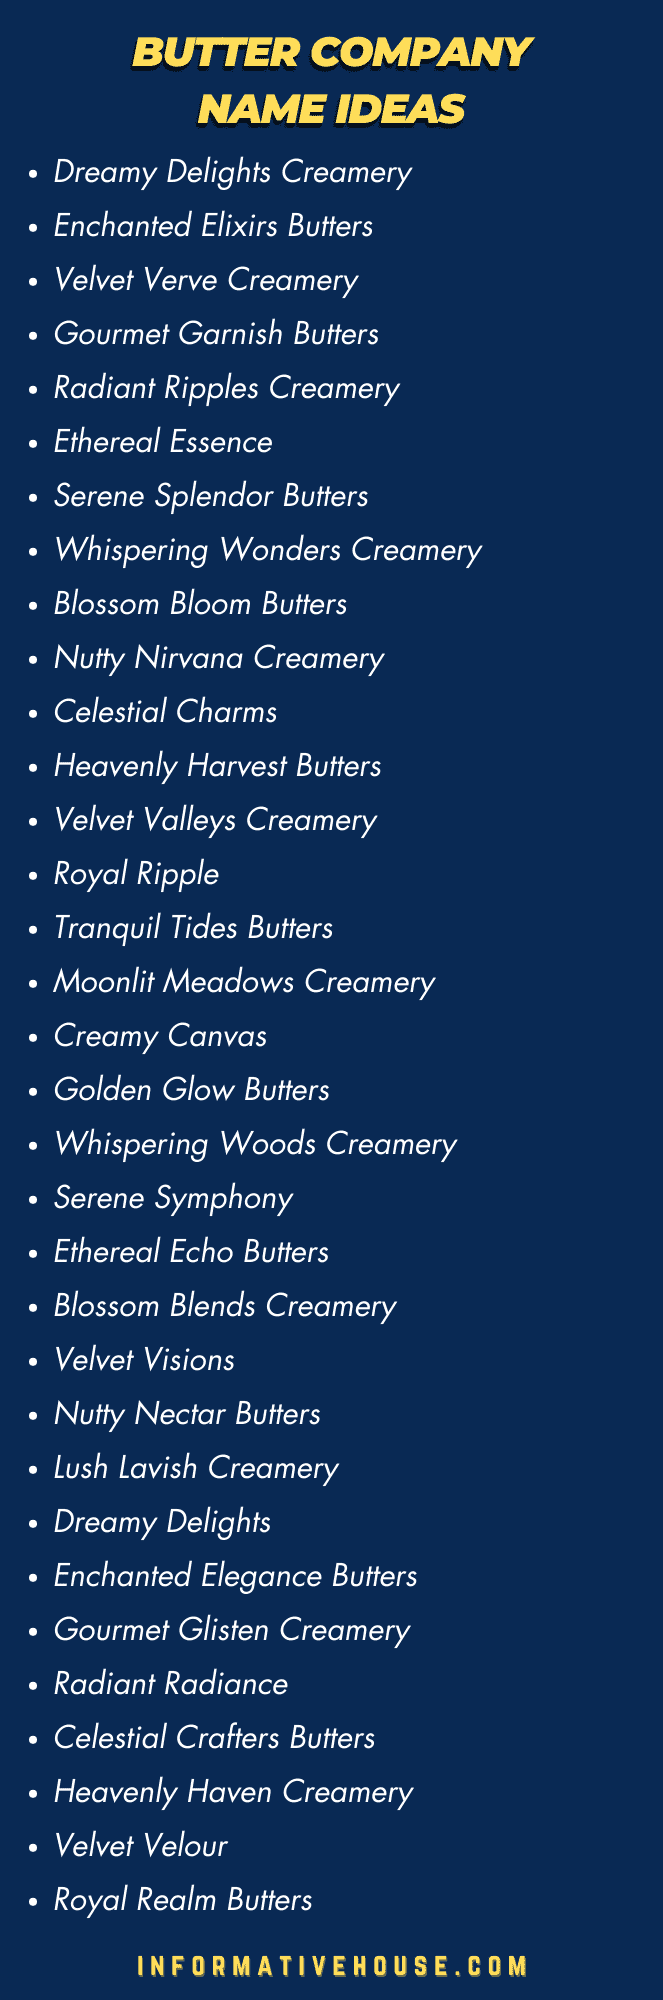 List of 50 Butter Company Names ideas to choose for your butter business or butter company 